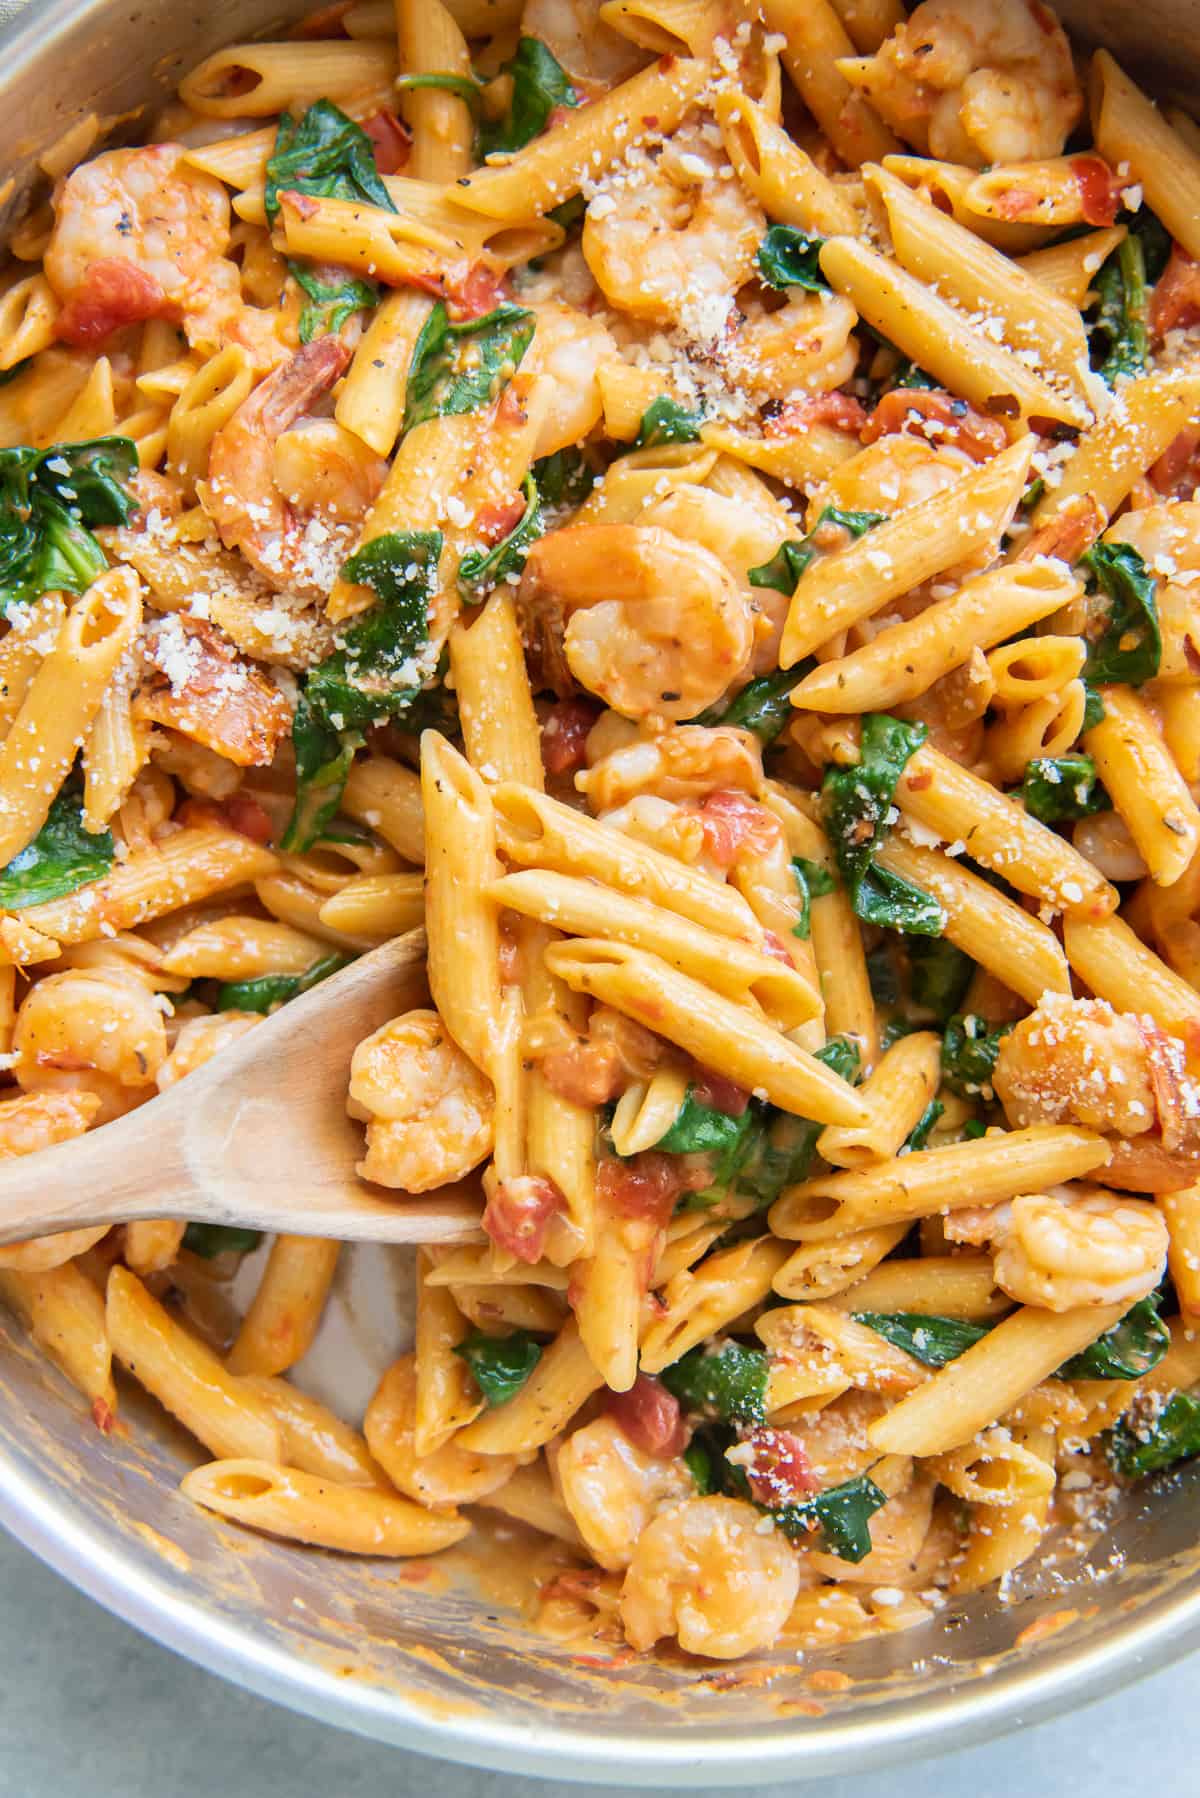 A spoon scoops pasta with shrimp and spinach from a skillet.